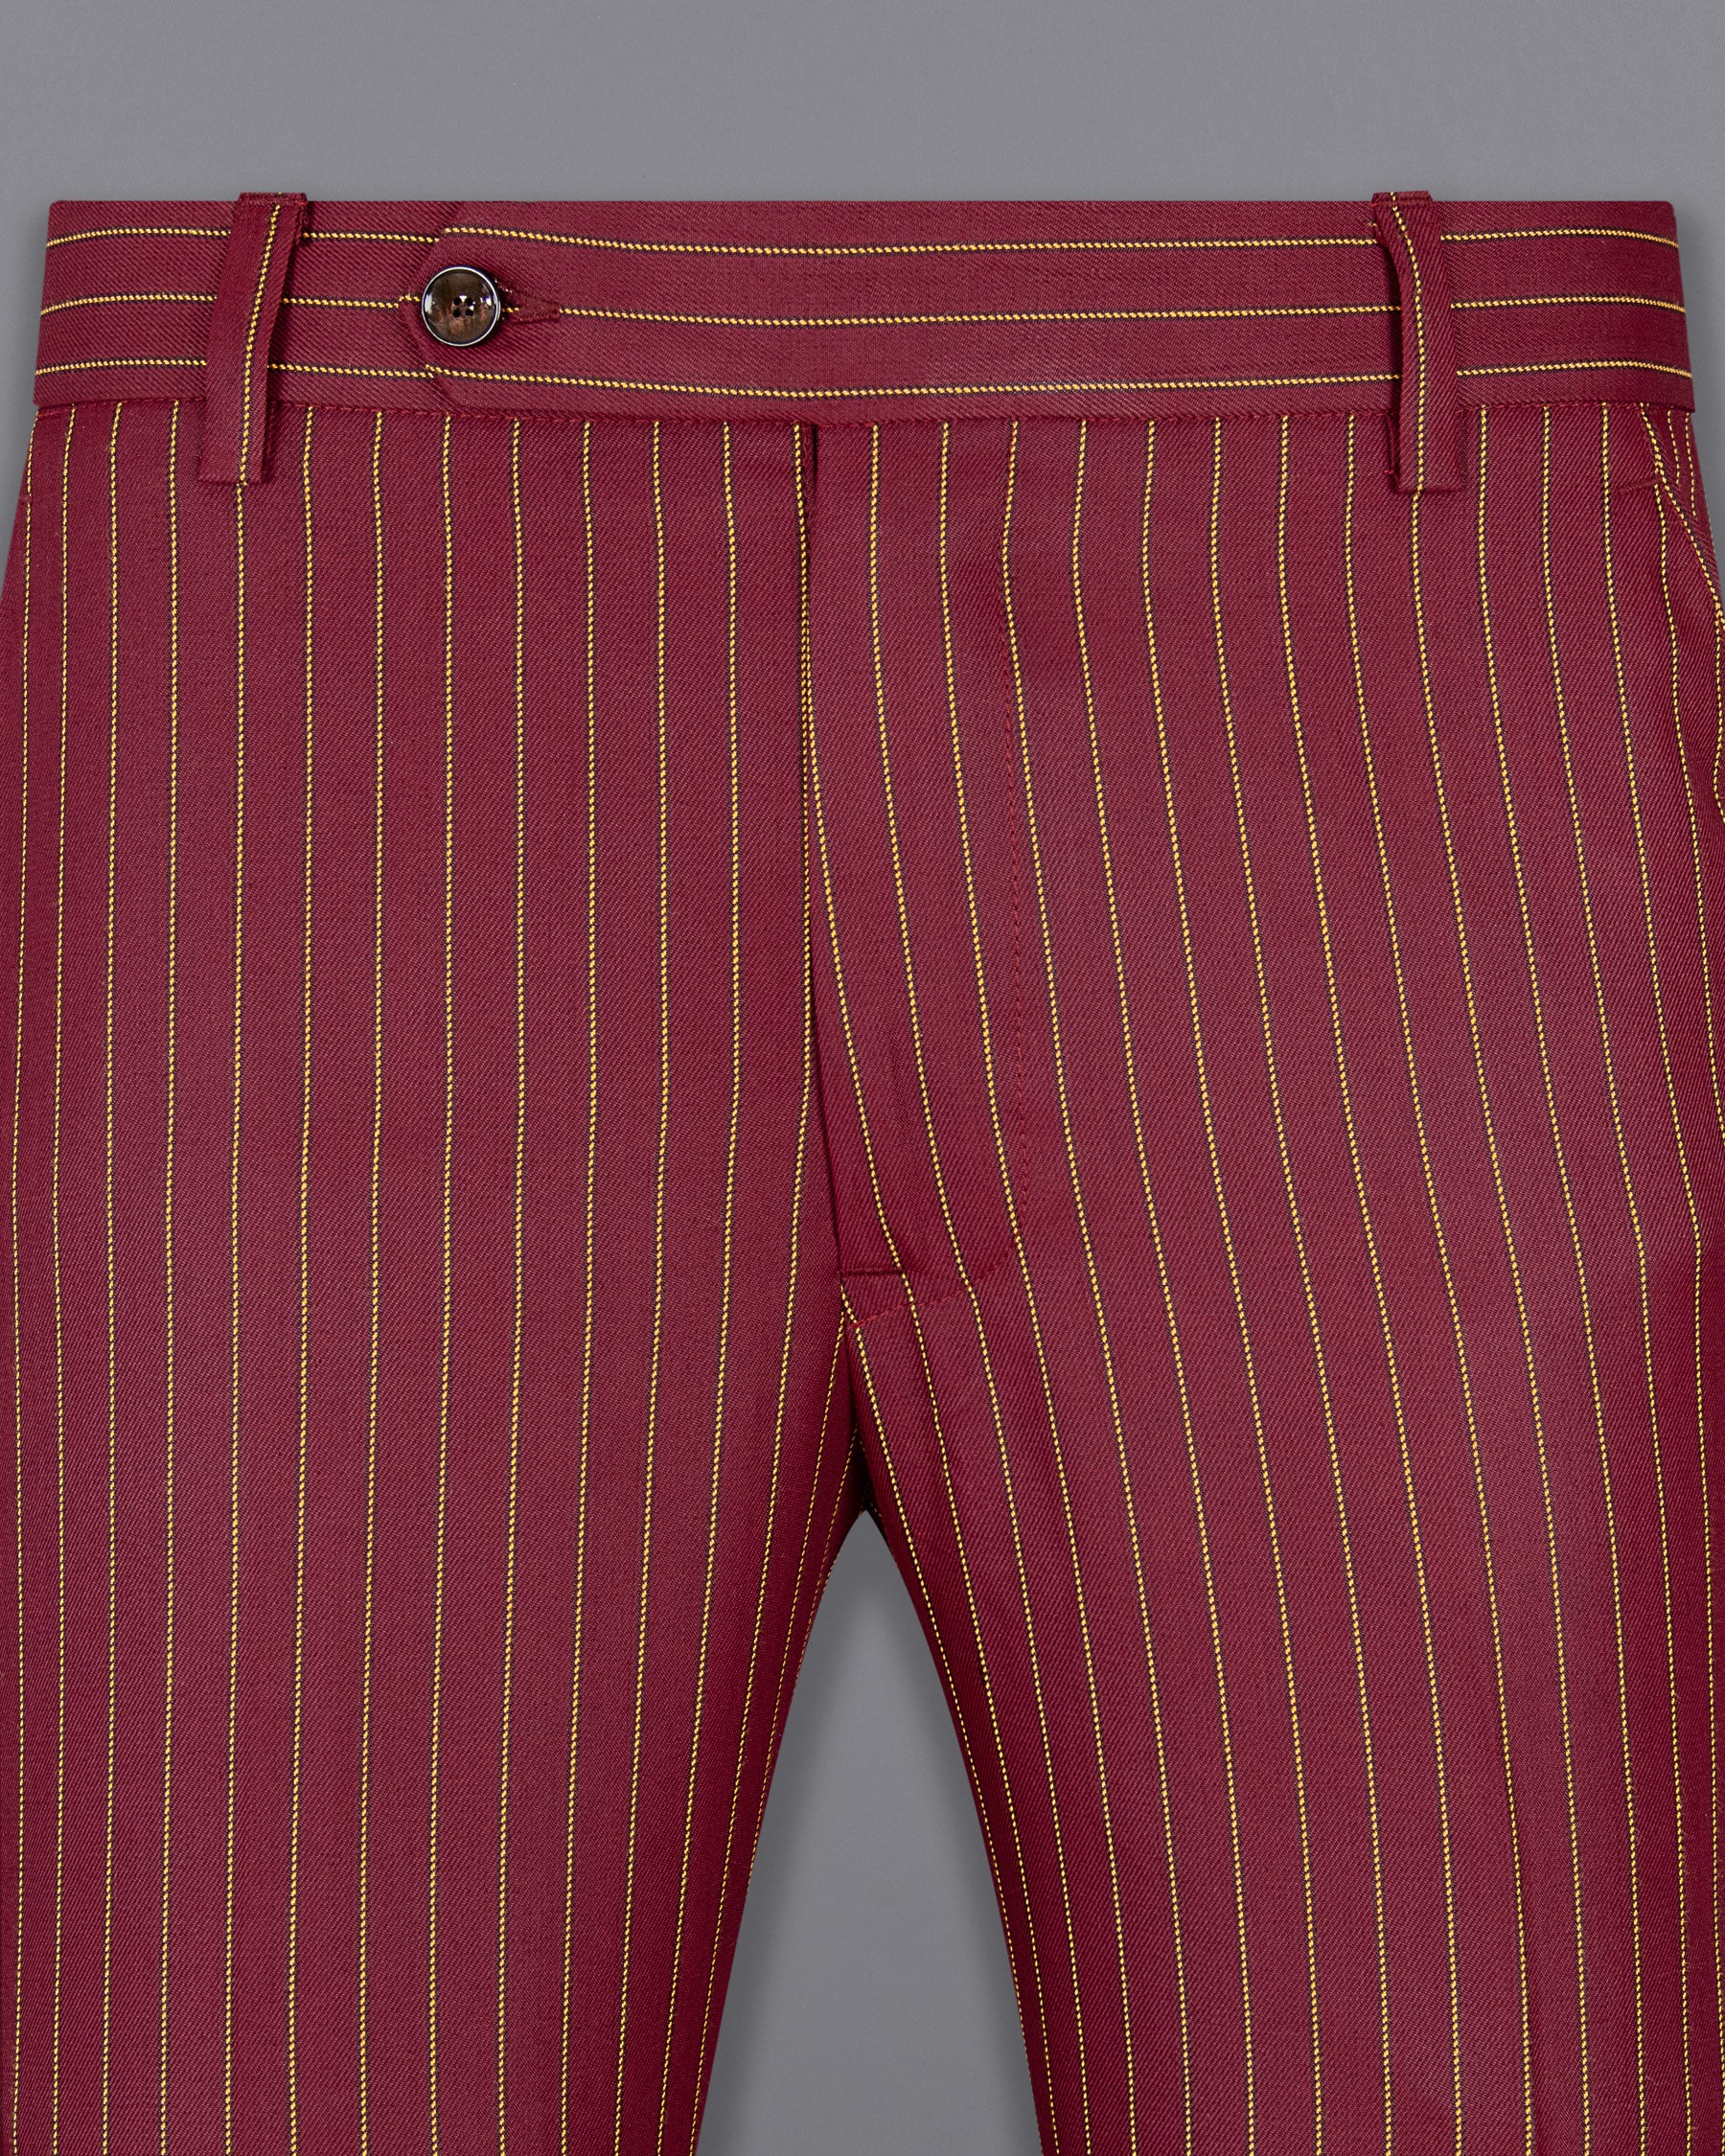 Tosca Red with Cream Can Yellow Striped Woolrich Pant T1290-28, T1290-30, T1290-32, T1290-34, T1290-36, T1290-38, T1290-40, T1290-42, T1290-44